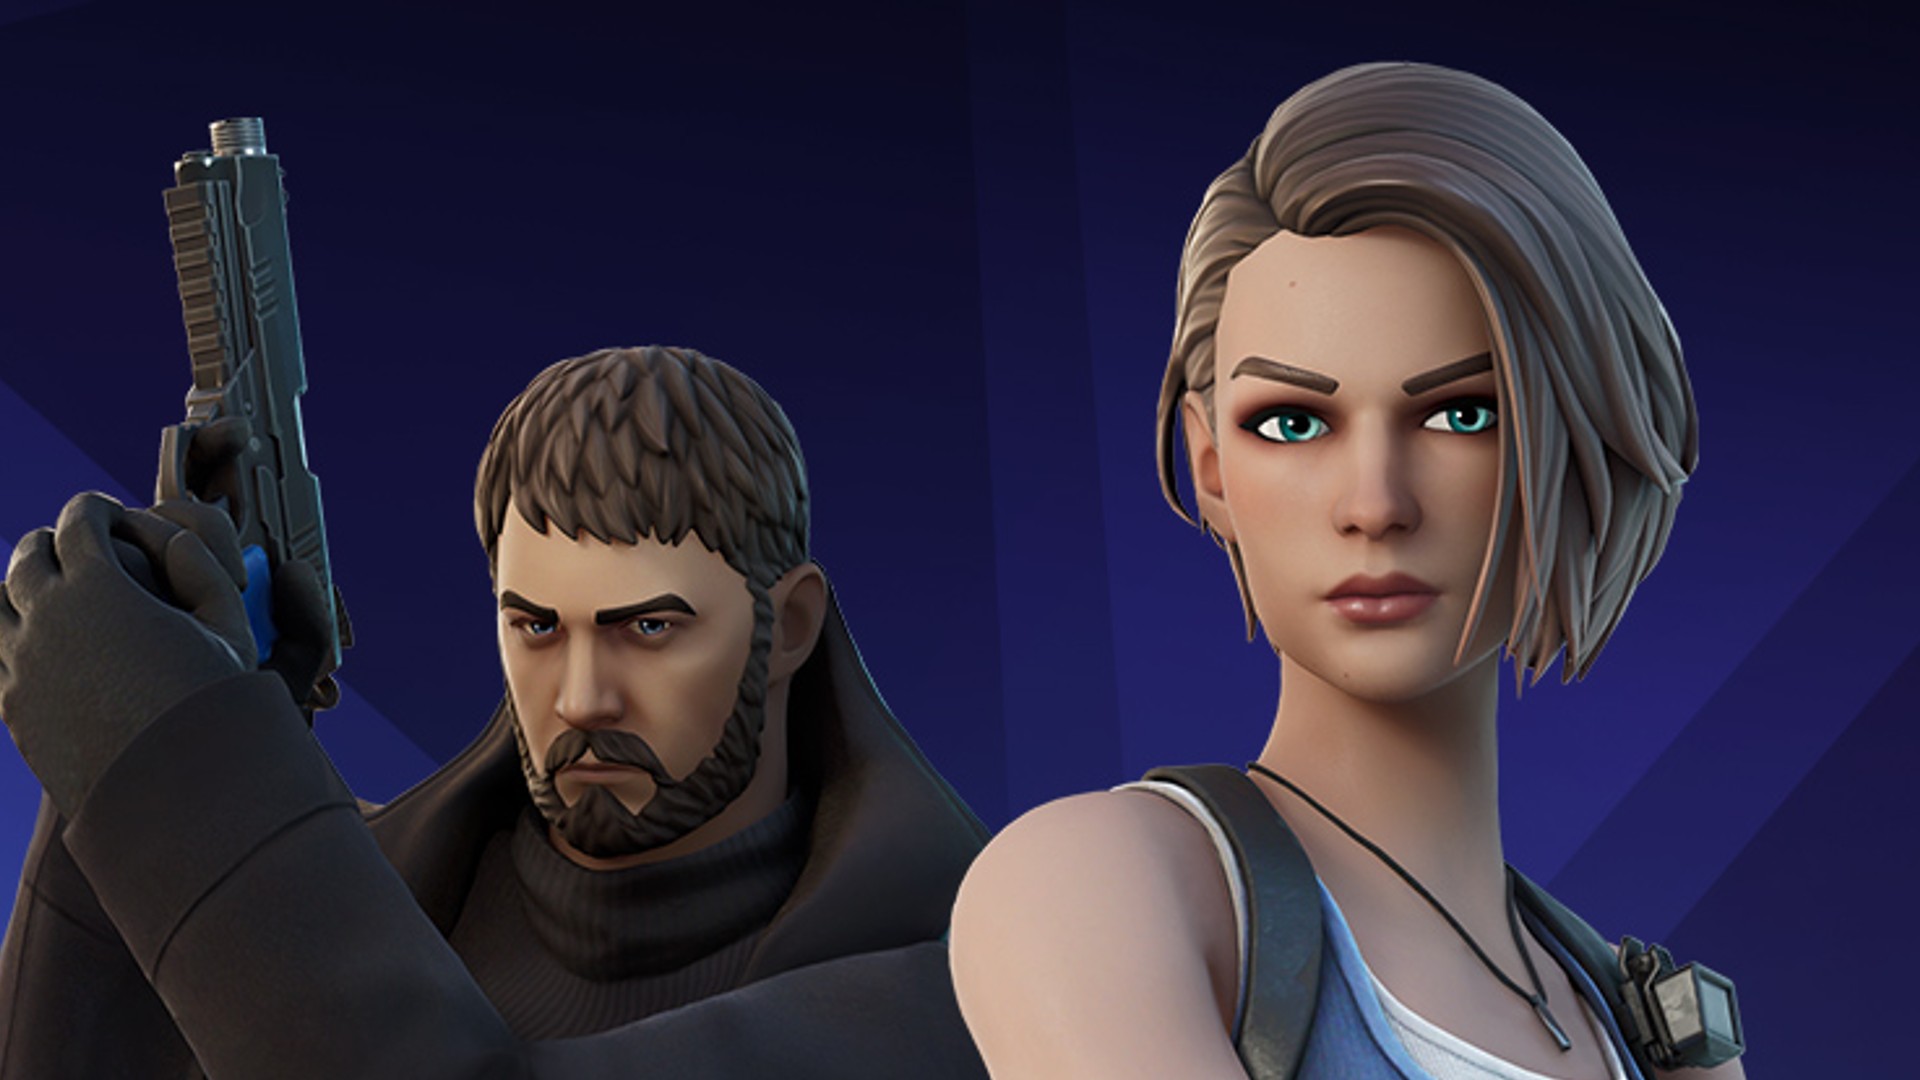 Resident Evil's Chris Redfield And Jill Valentine Join Fortnite In Latest Crossover thumbnail